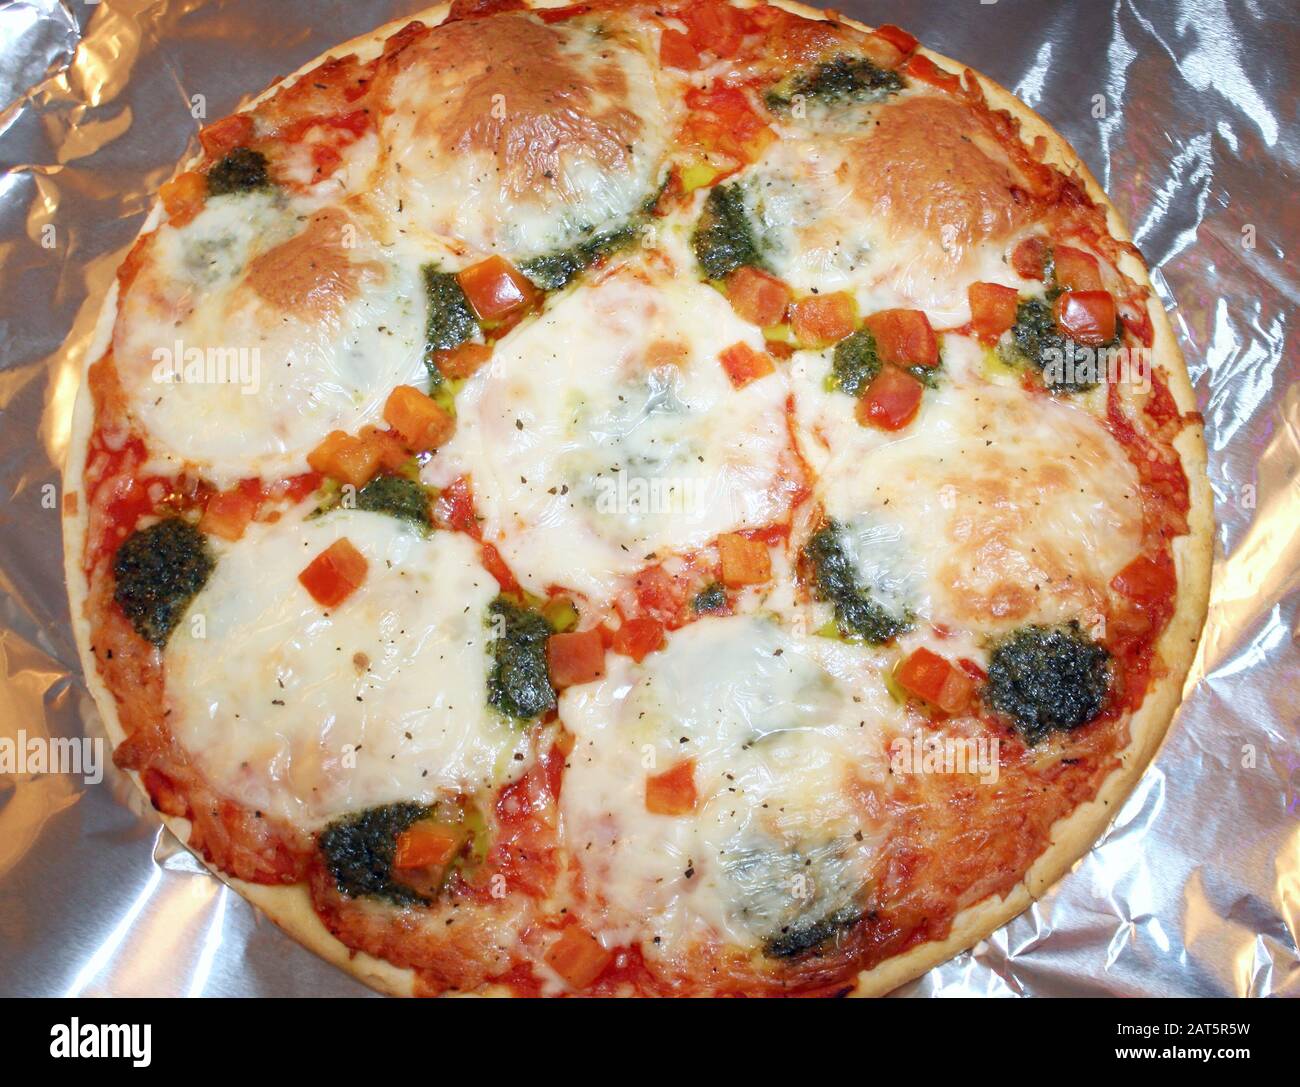 Delicious vegetarian pizza with melted mozzarella cheese cooking on aluminum foil Stock Photo